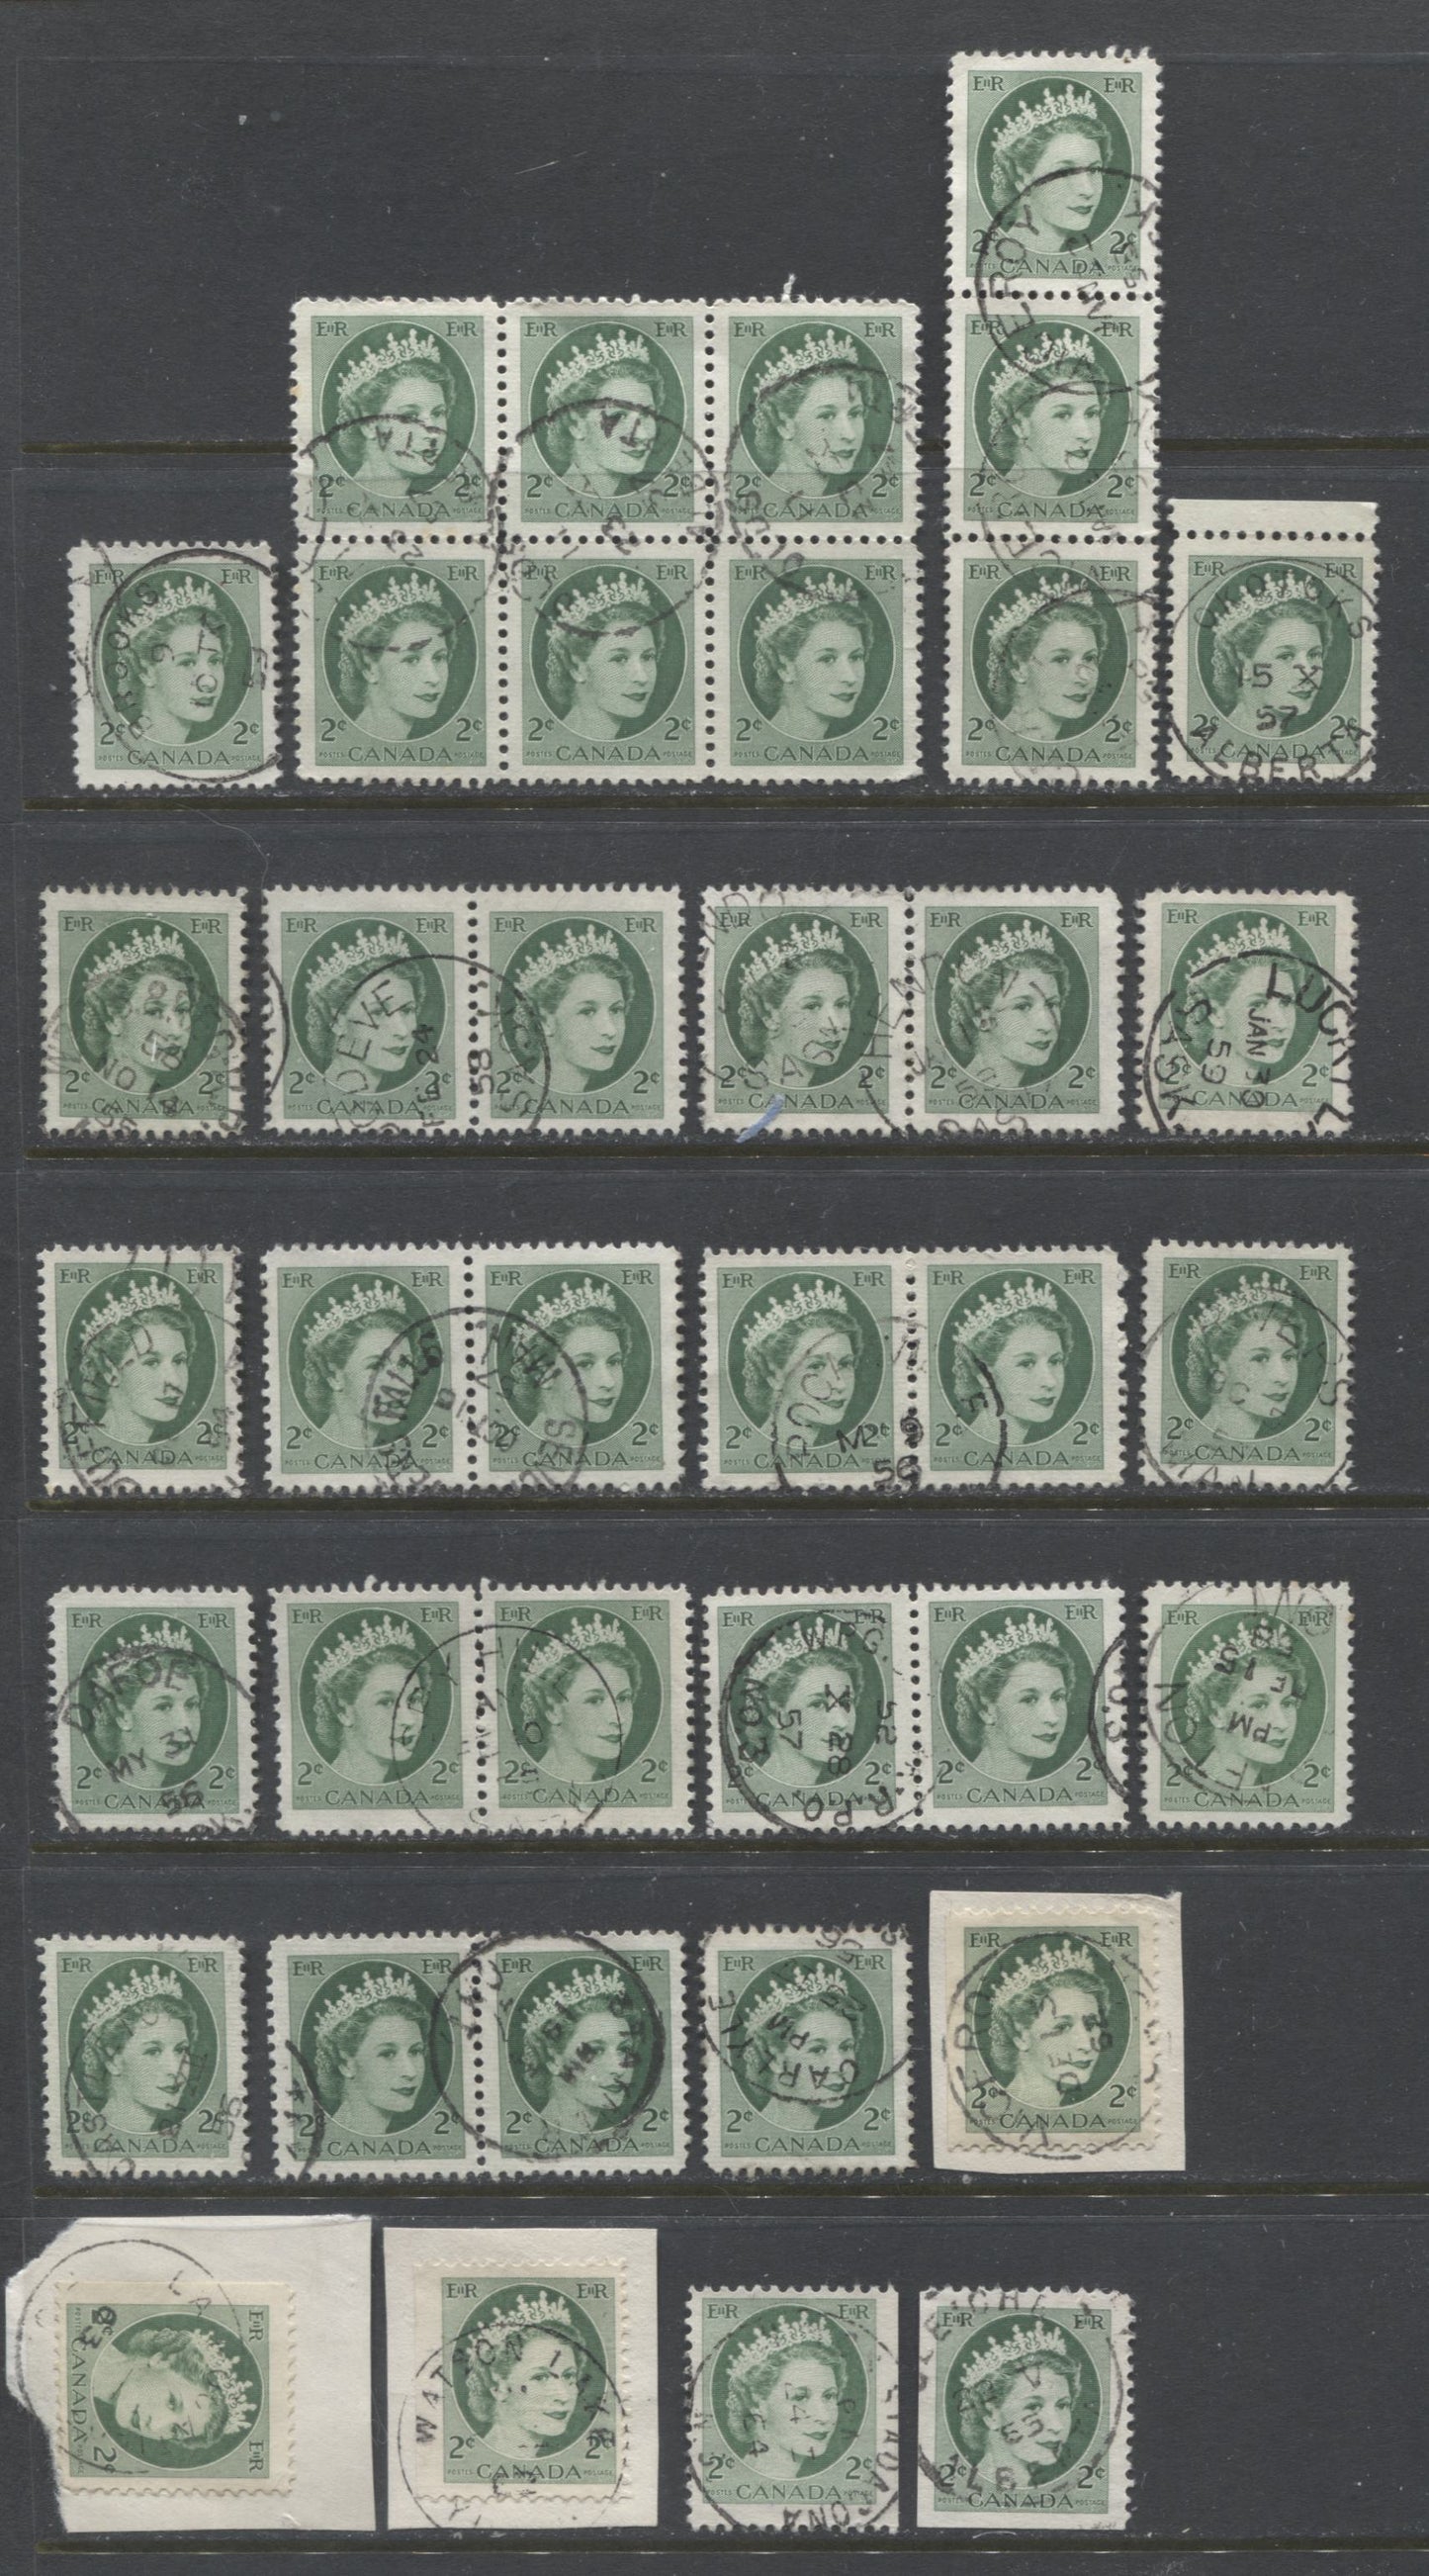 Lot 504 Canada #338, v, 338as 2c Green Queen Elizabeth II, 1954-1962  Wilding Issue, 15 VF Used Singles, Block Of 6, strip of 3 and 7 Pairs, With SON Dated CDS Town/RPO Cancels & In-Period